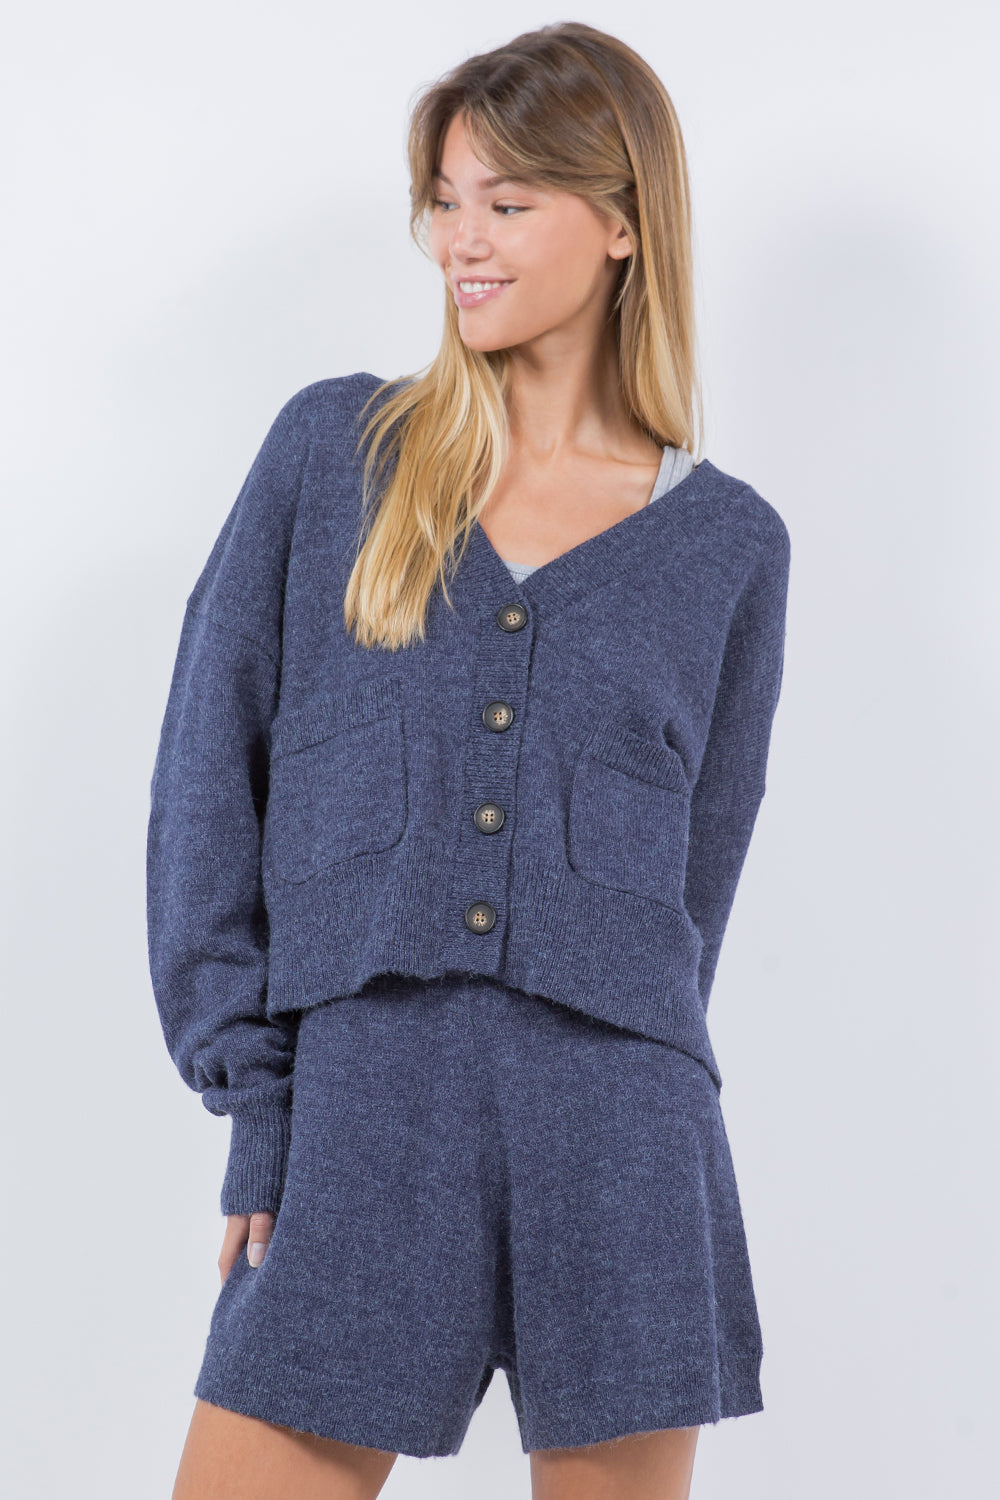 CARDIGAN SWEATER WITH POCKETS NAVY